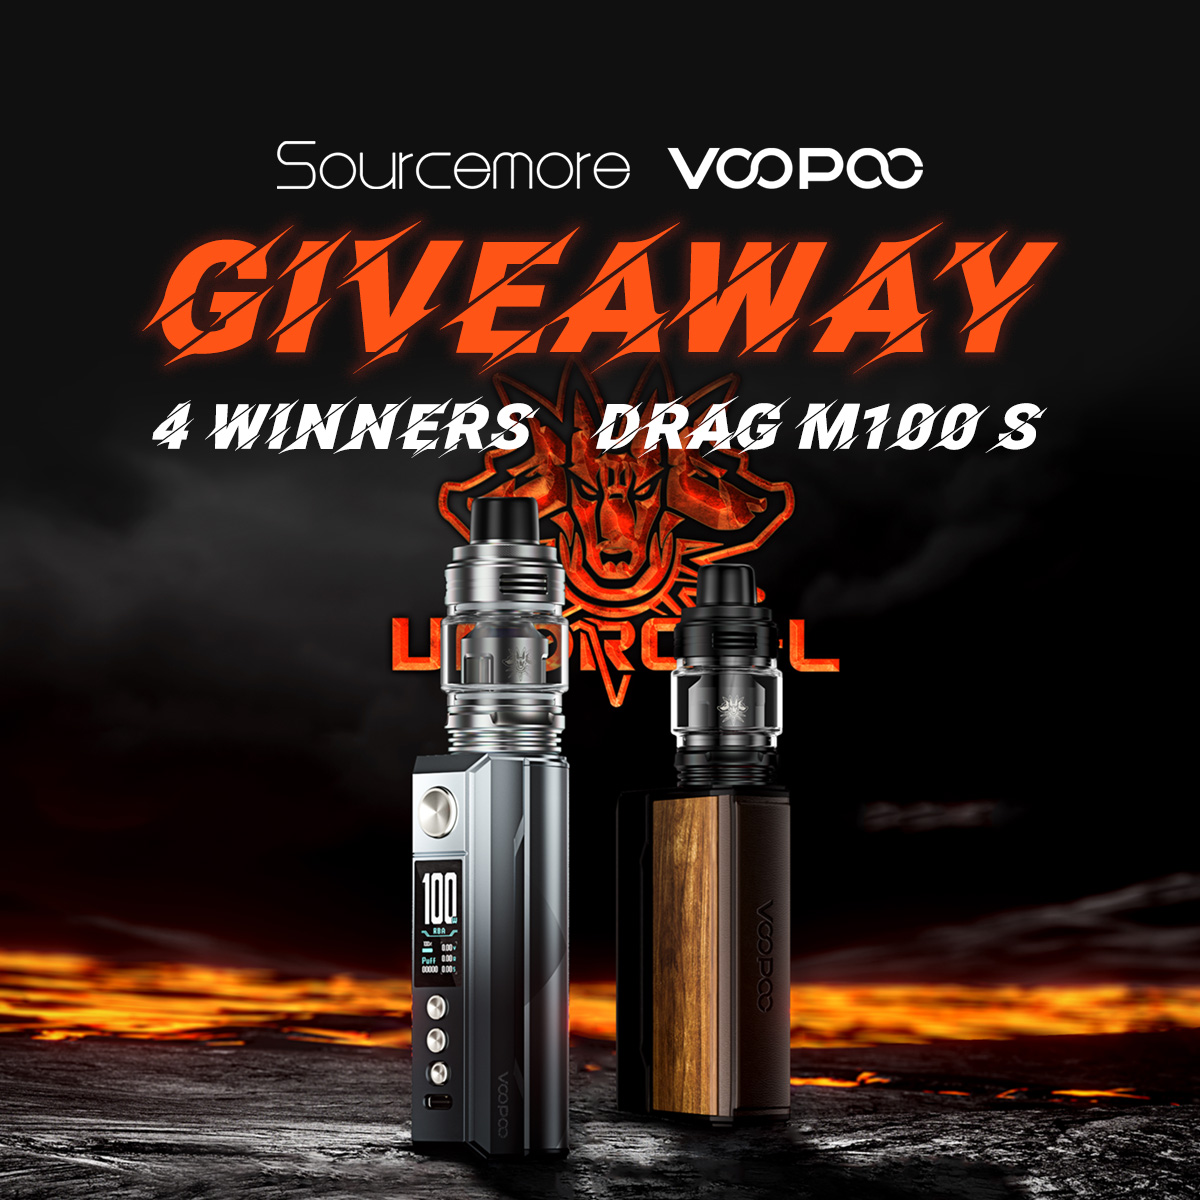 GIVEAWAY TIME

Here comes VOOPOO & Sourcemore Giveaway!

Terms & Conditions 👉sourcemore.com/voopoo-drag-m1…

Stand a Chance to Win🎁
❤Good Luck!

⚠ Warning: The device is used with e-liquid which contains addictive chemical nicotine. For Adult use only.

#sourcemore #DragM100S